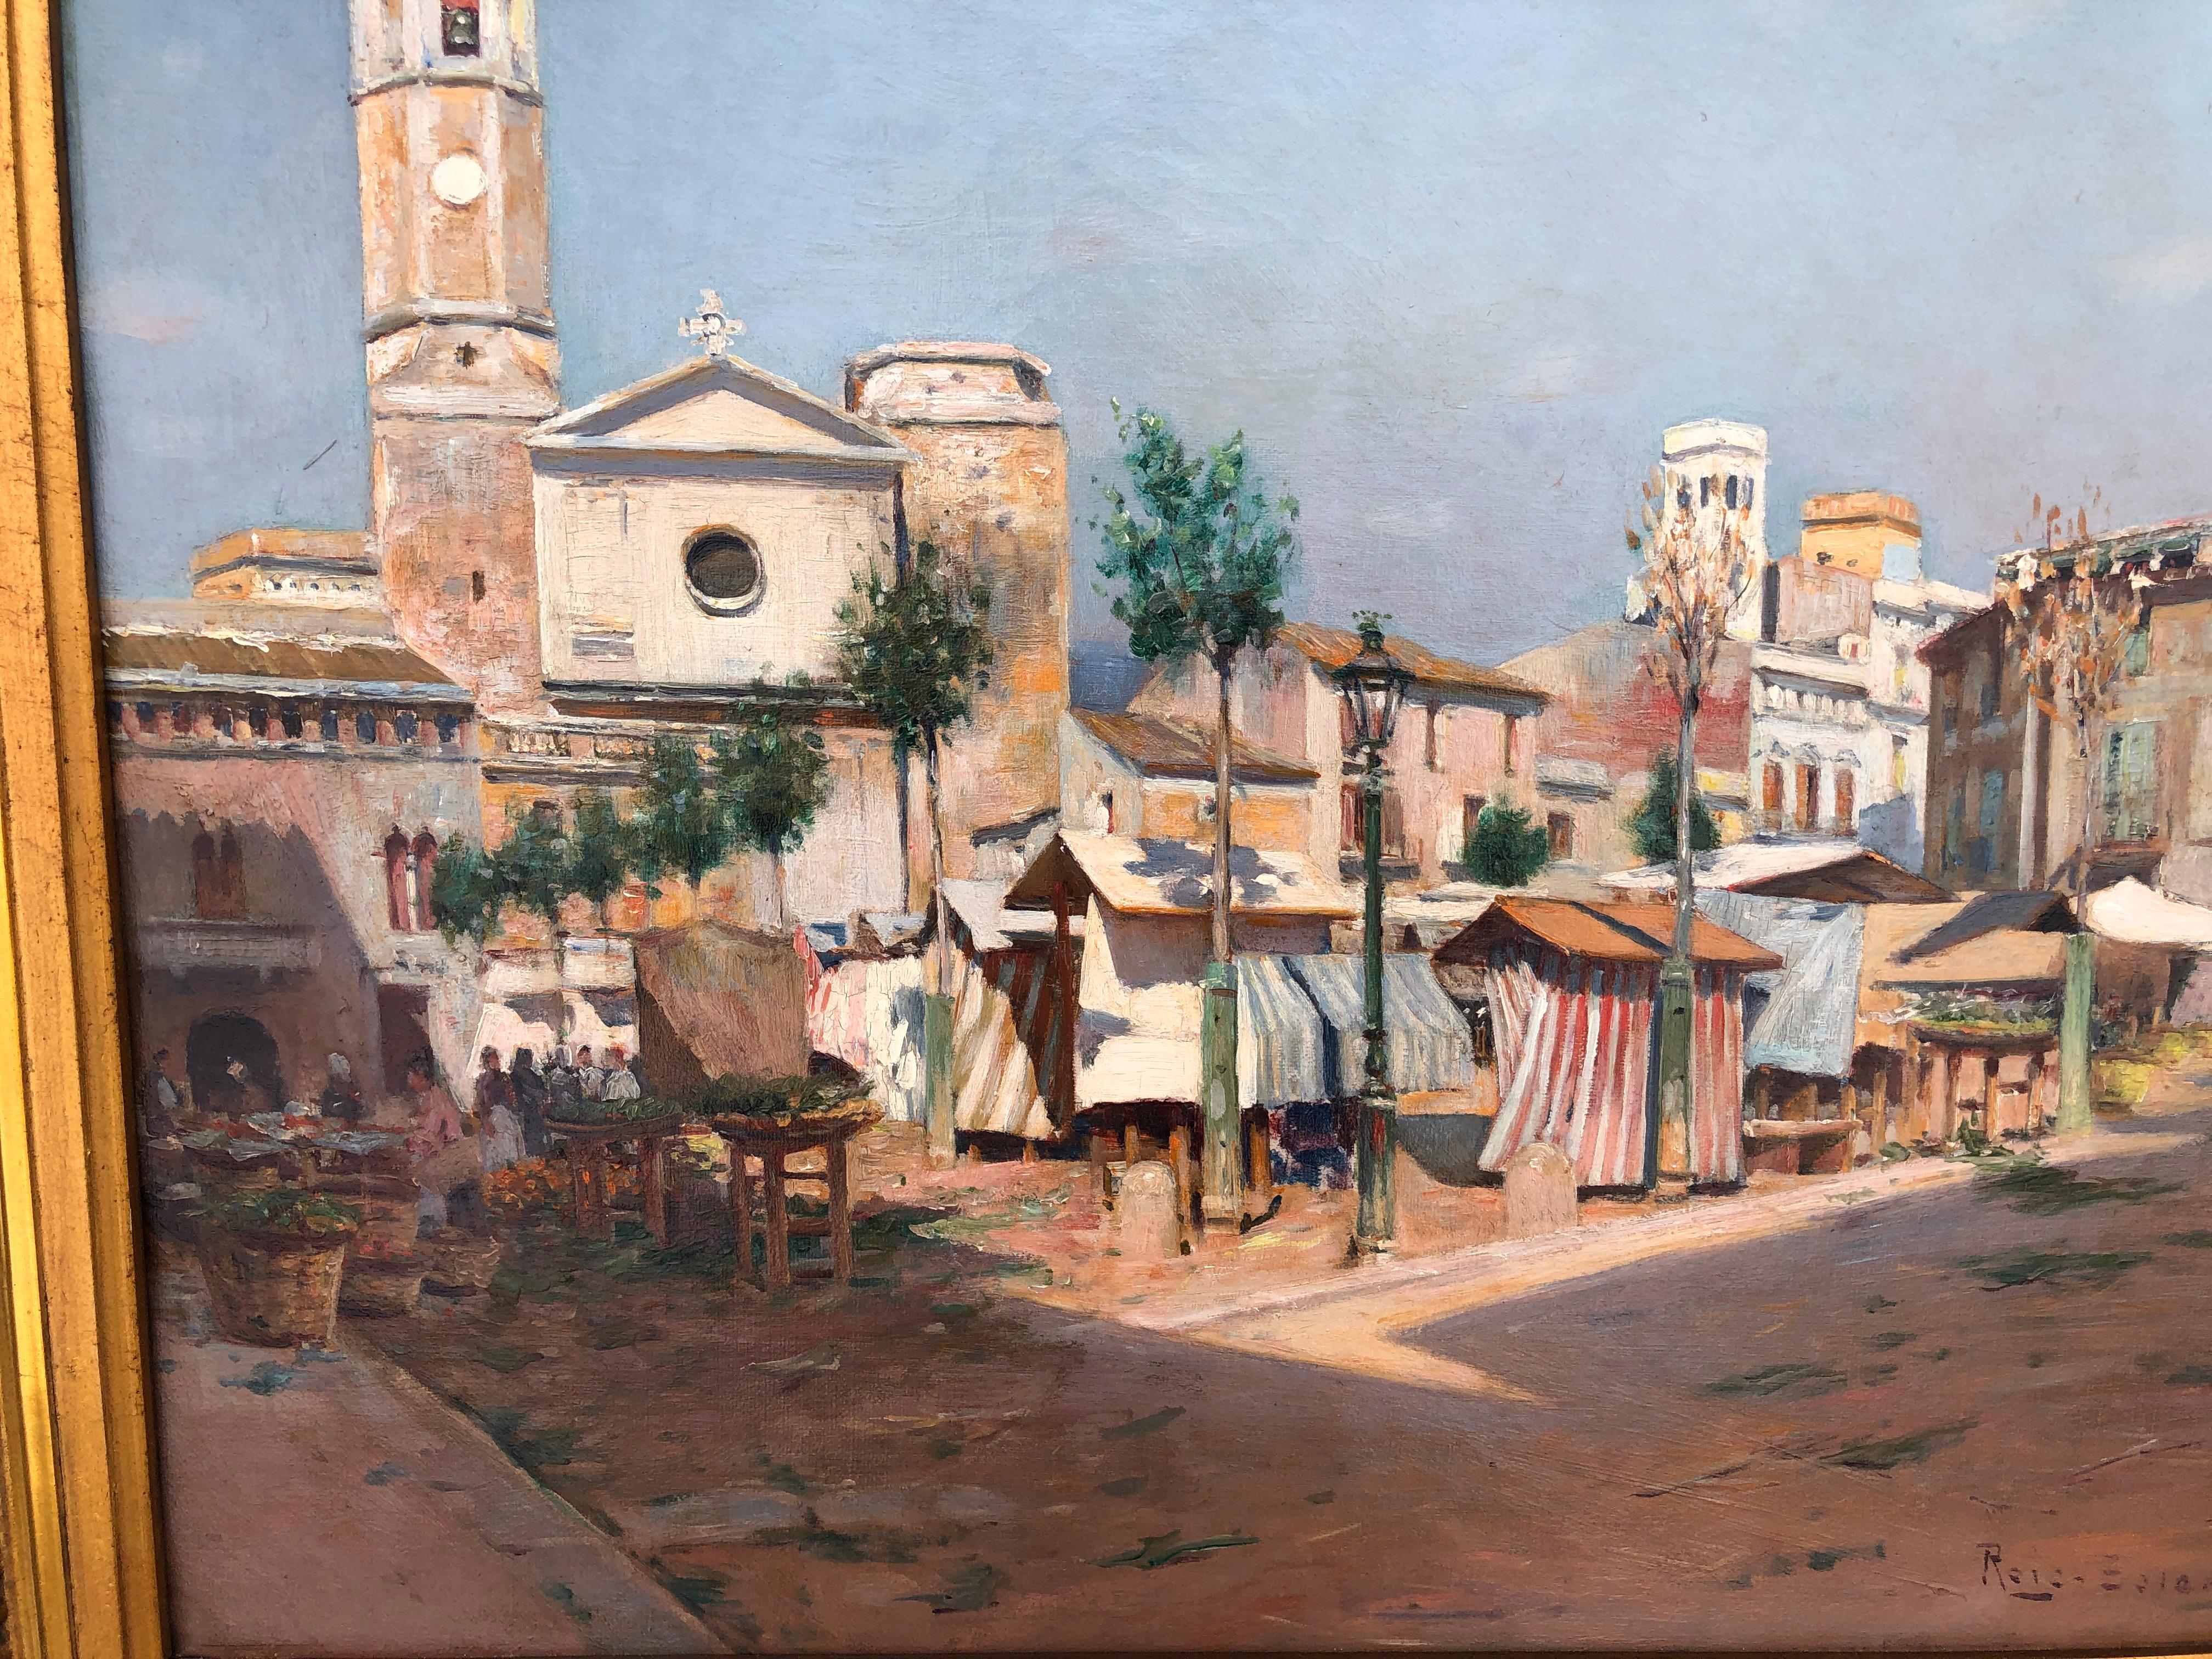 Frame size 65x71 cm.

Trained at the Escuela de Bellas Artes de la Lonja, where he was a disciple of Modesto Urgell, he moved to Paris and Rome to perfect his studies. He was closely linked to Sitges, where he lived since 1881, and started there,